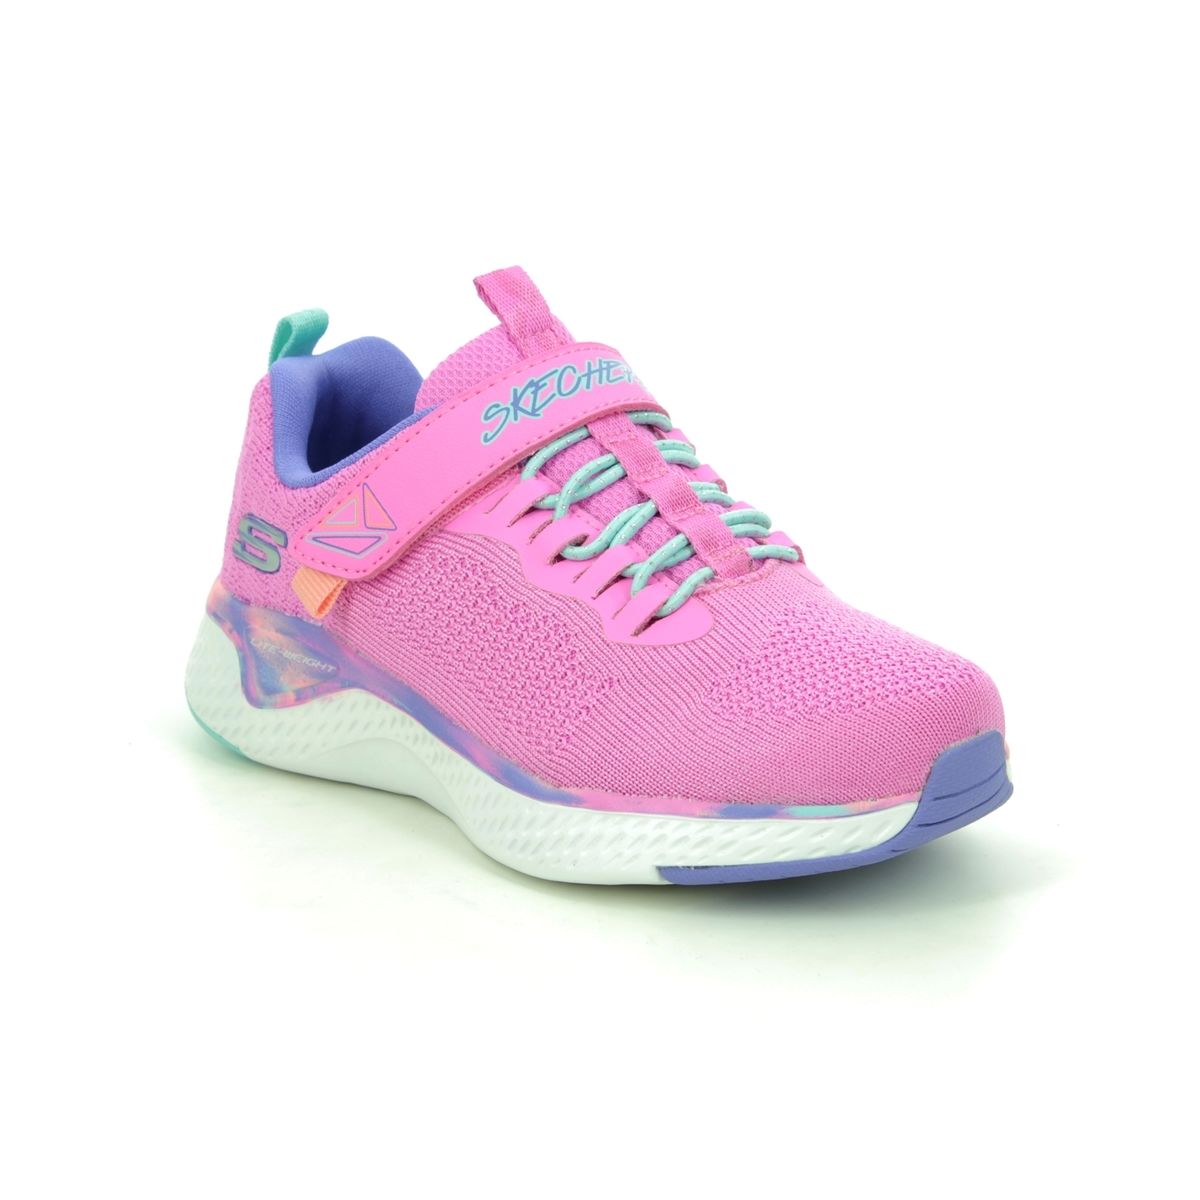 Skechers Solar Fuse Paint Power Pink Kids Girls Trainers 302041L In Size 27 In Plain Pink For kids